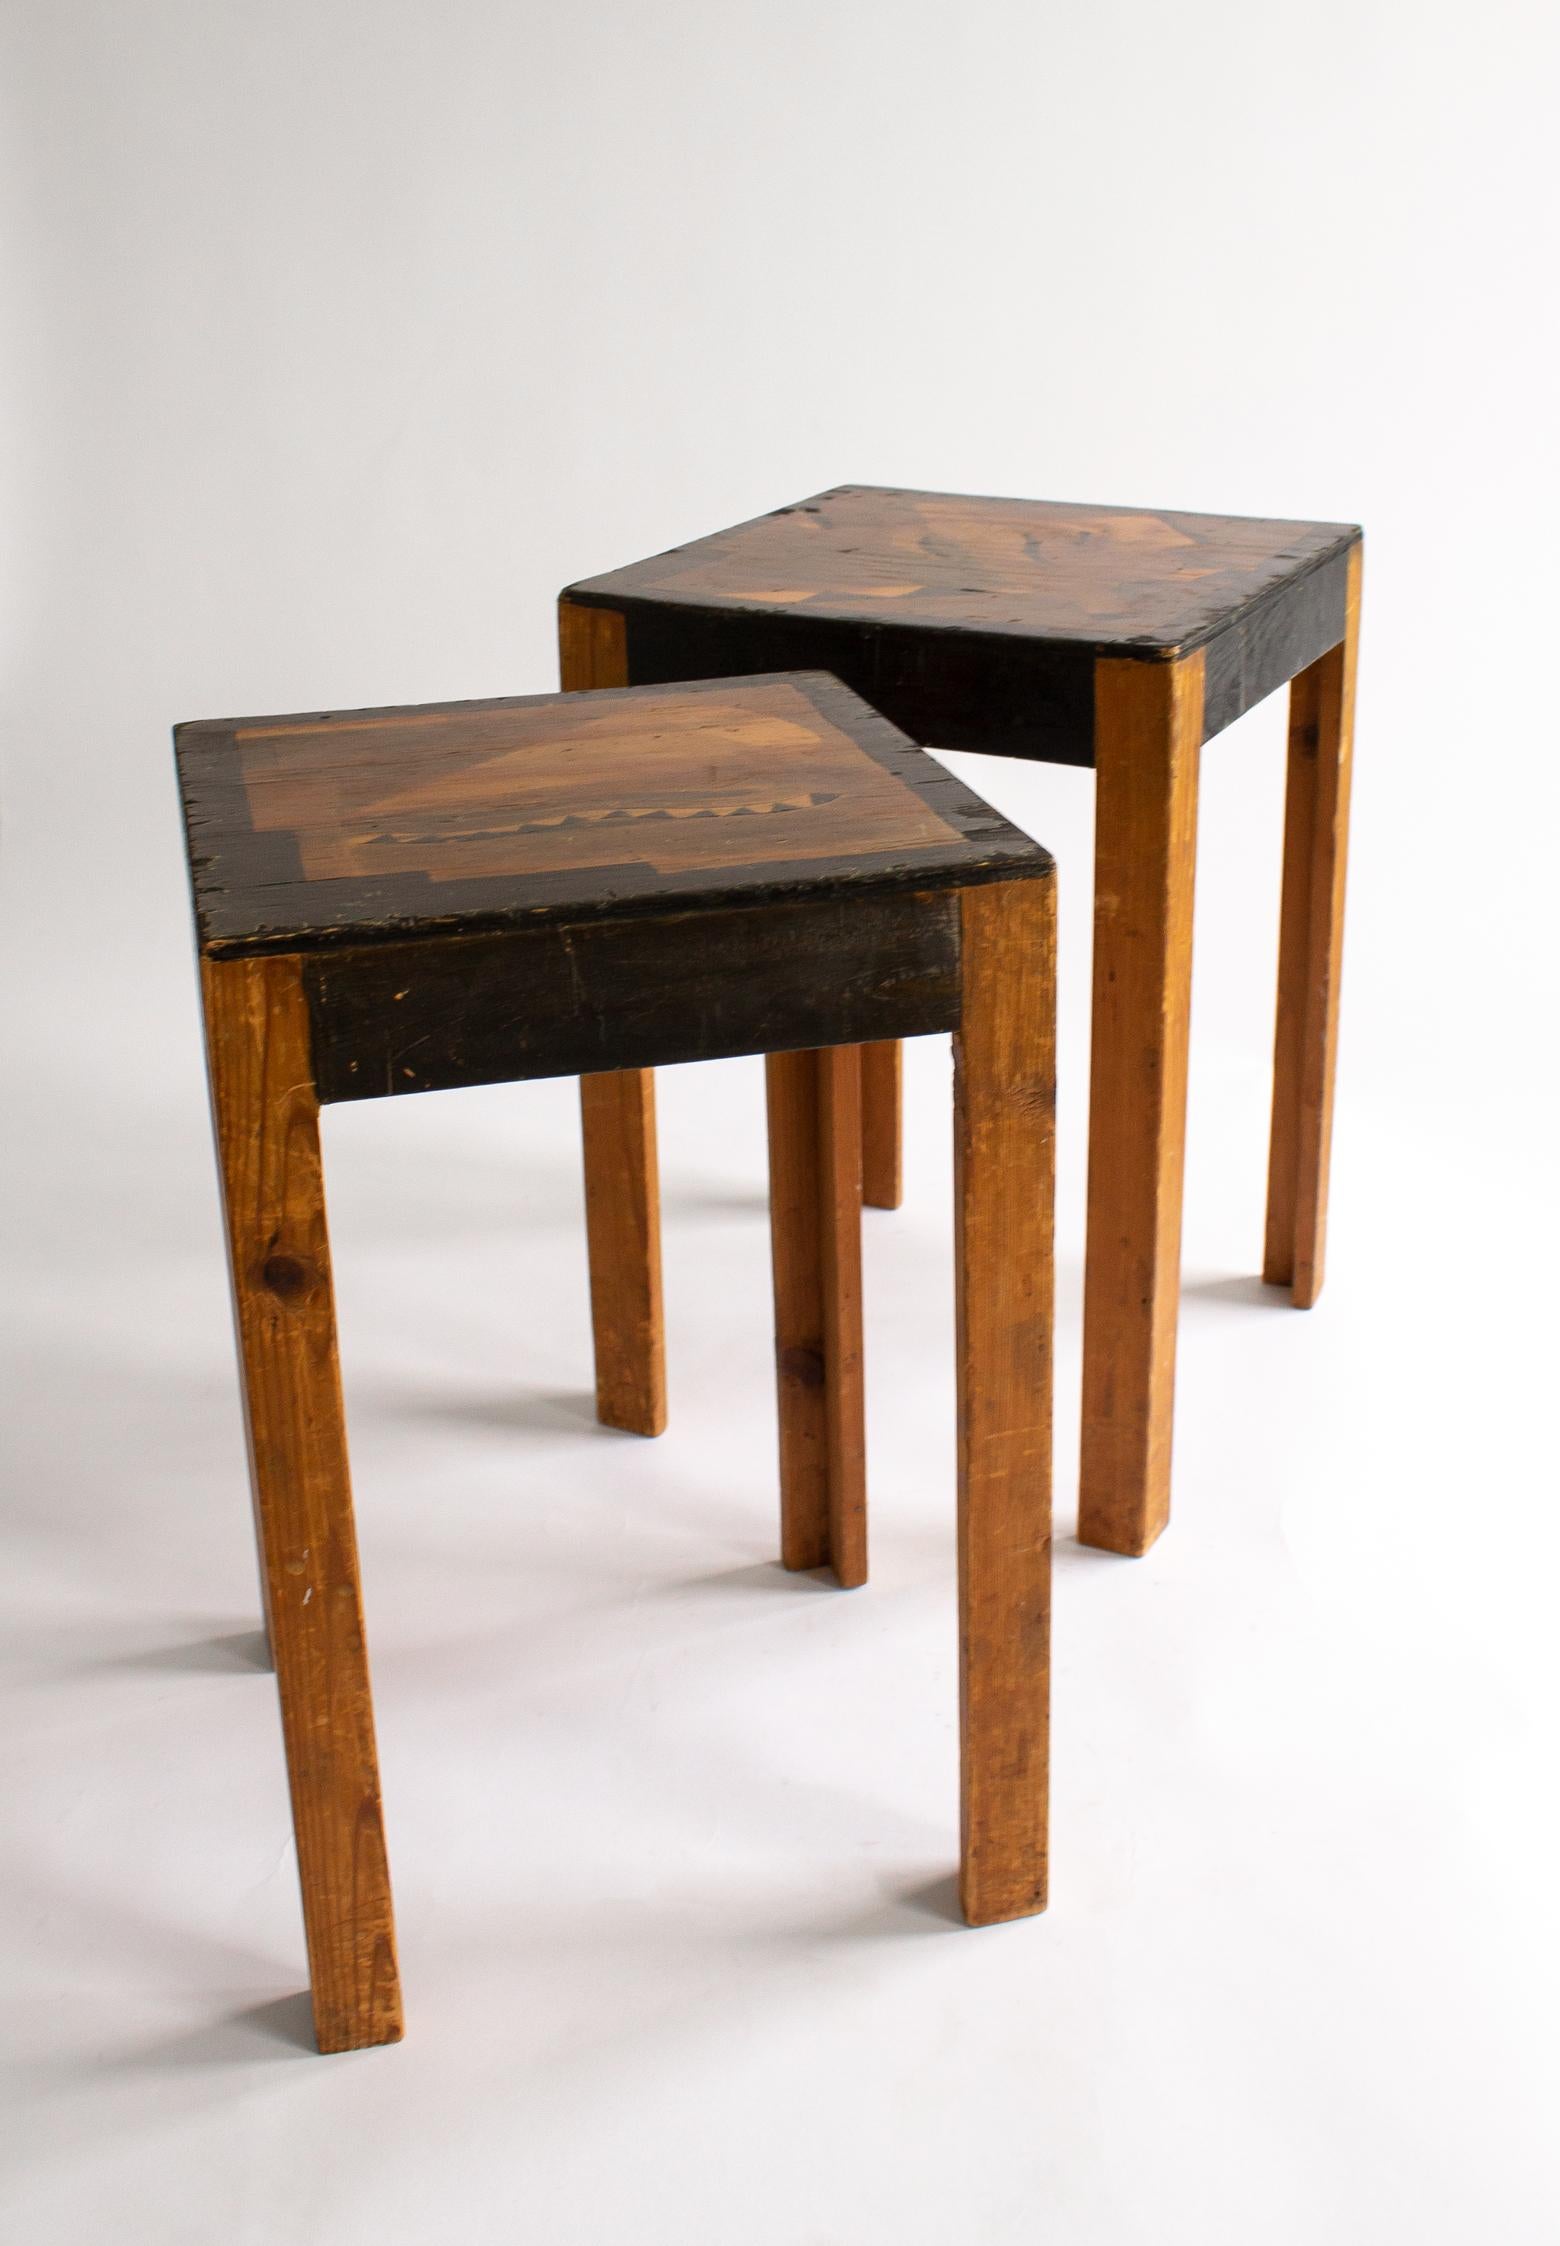 Fir Two Art Deco Nesting Tables Made of Unknown Swedish Artist in 1930s-1940s For Sale